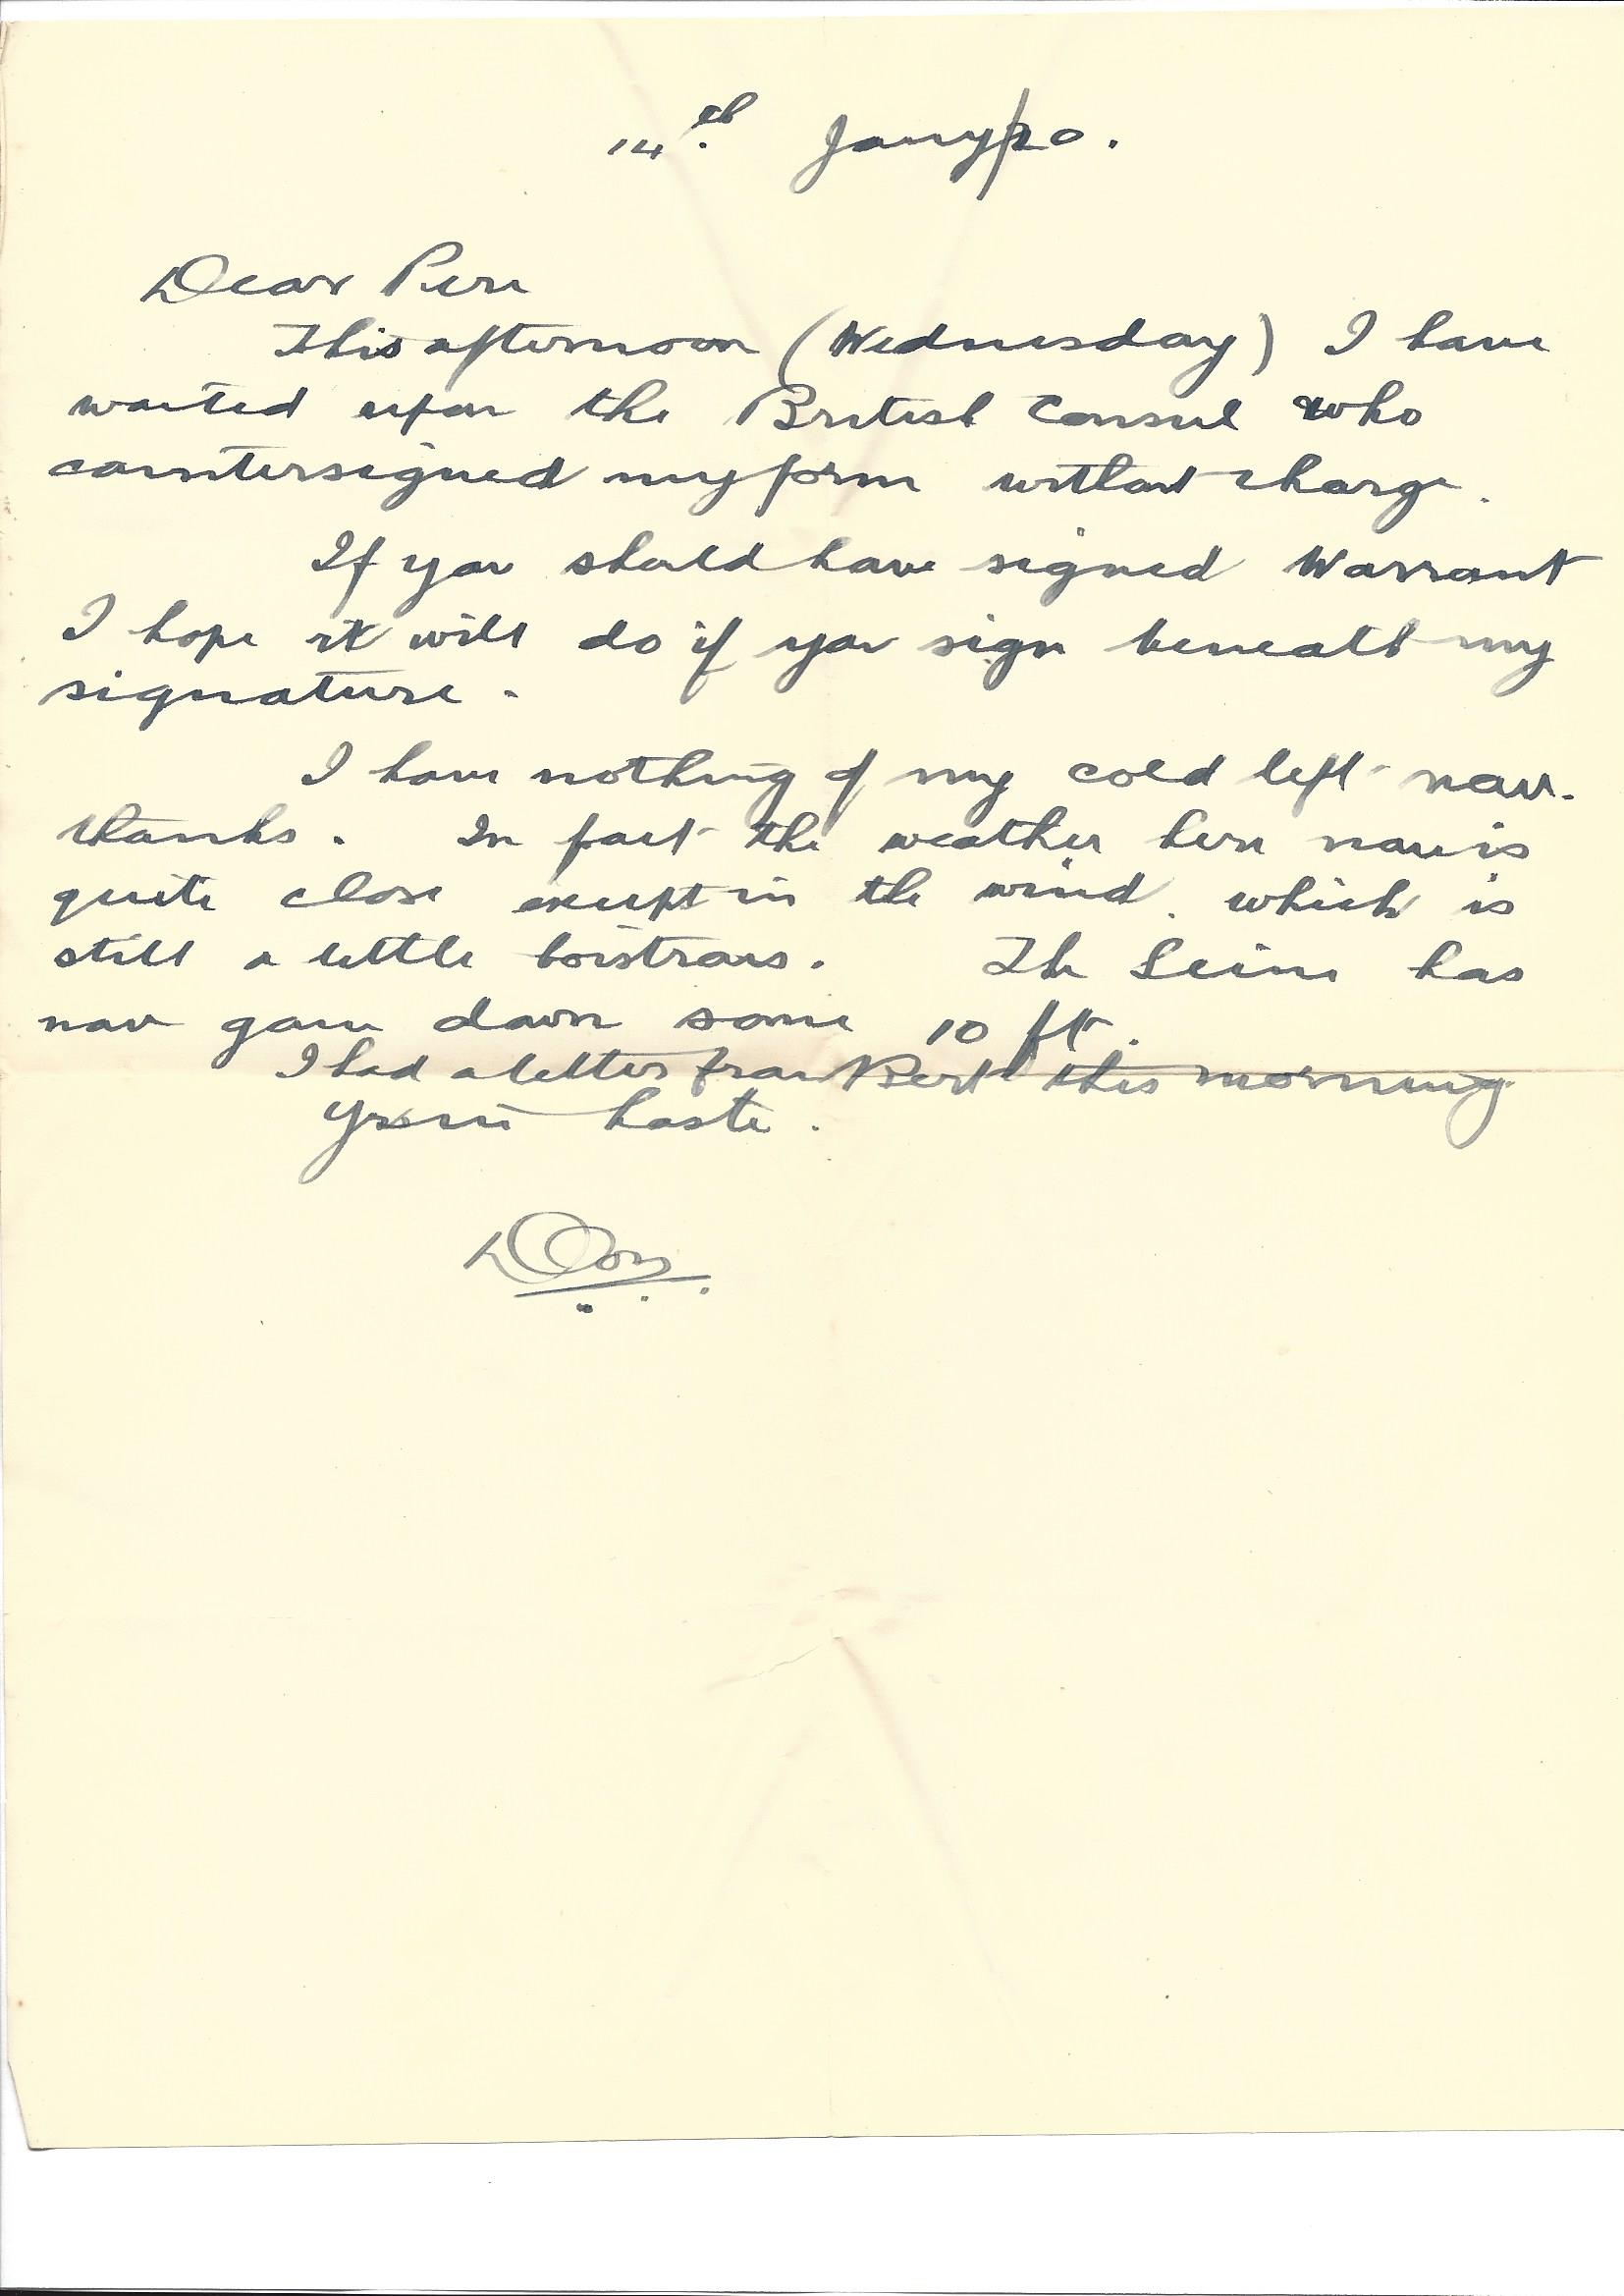 1920-01-14 page 2 letter by Donald Bearman